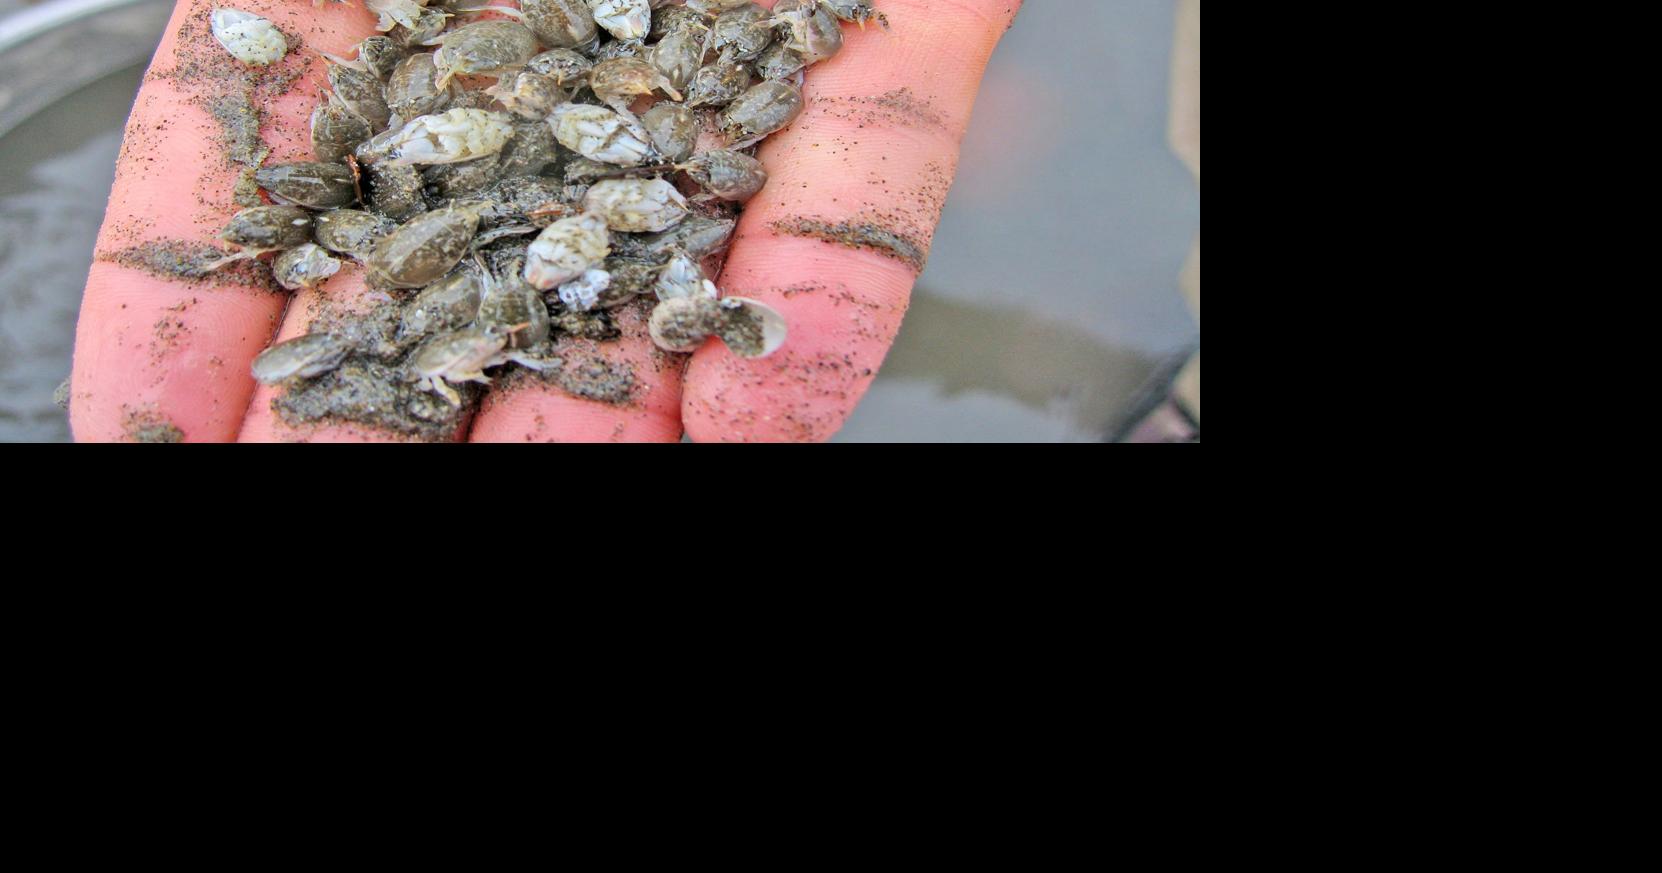 Researchers examine impacts of plastic on sand crab, South County News